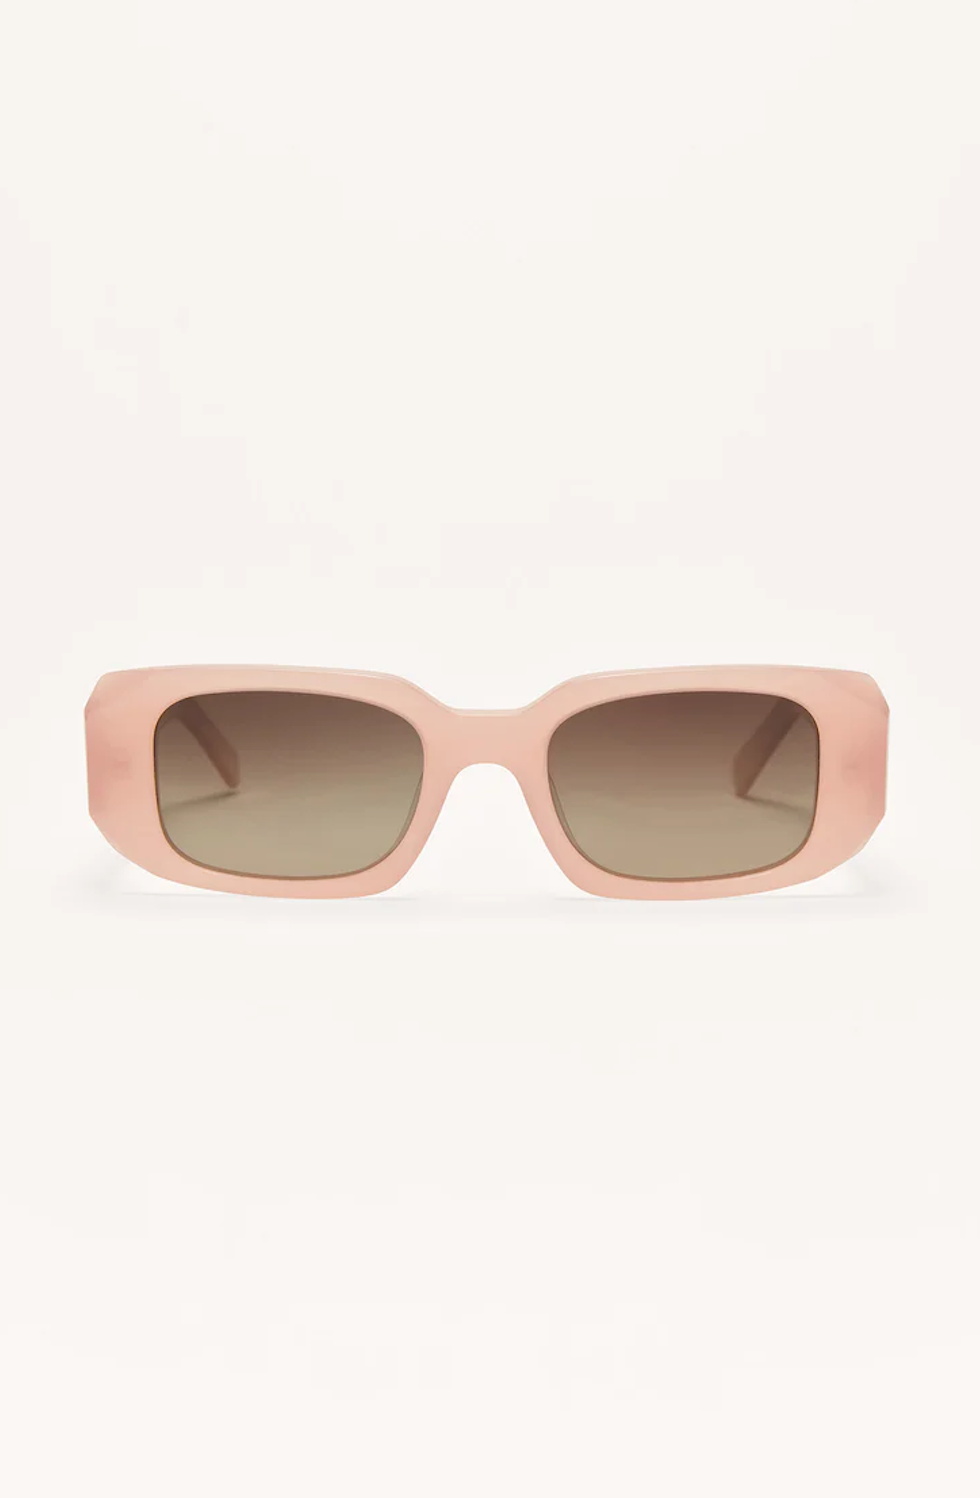 Z SUPPLY OFF DUTY SUNGLASSES IN BLUSH PINK